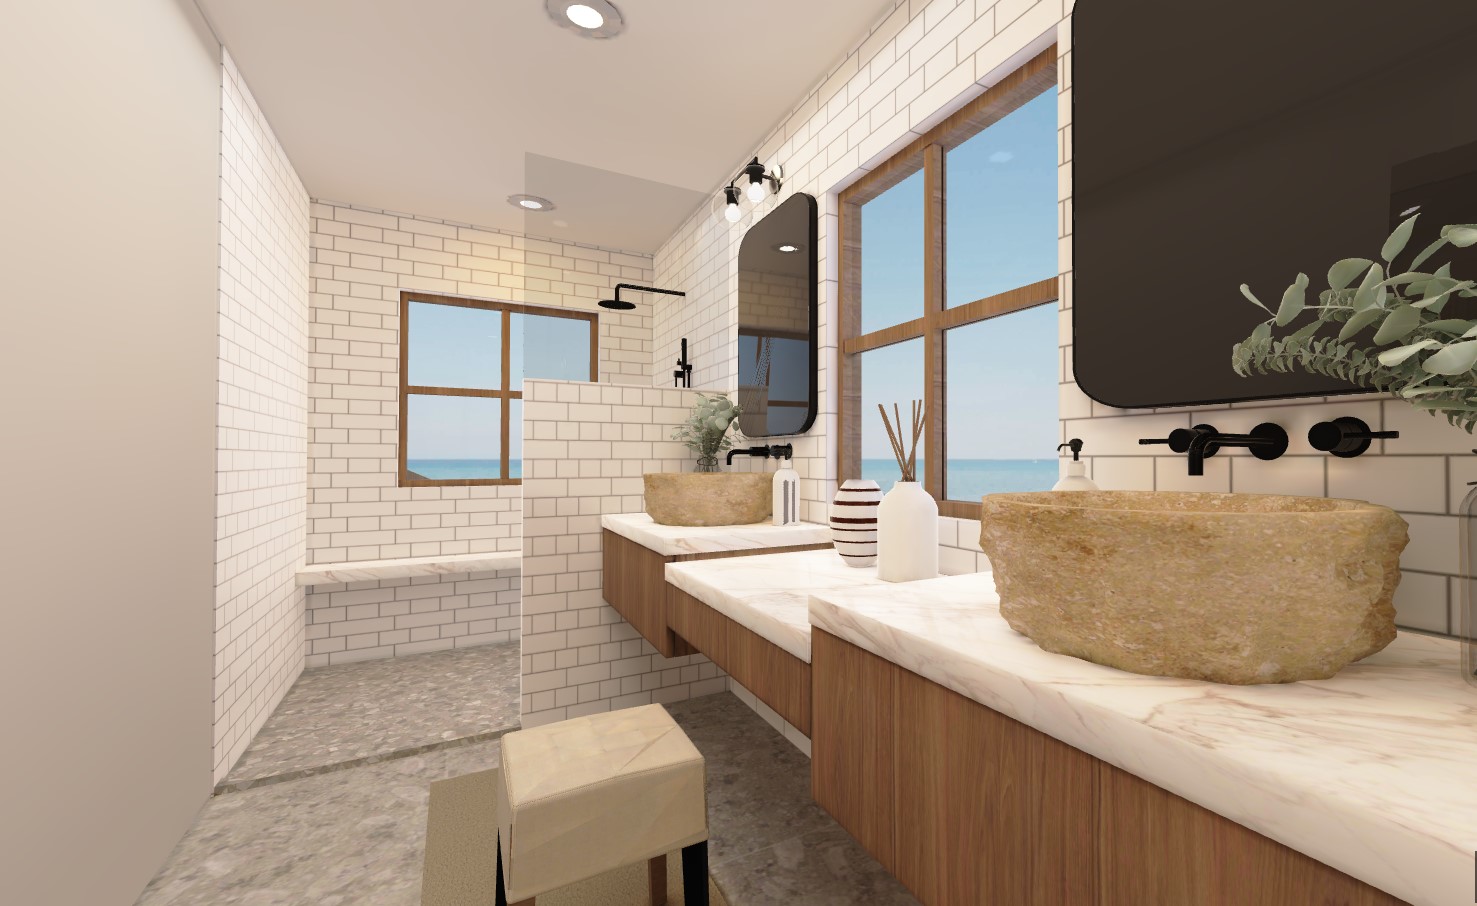 POINT-LOMA-OCEAN-VIEW-REMODEL-ADDITION-7